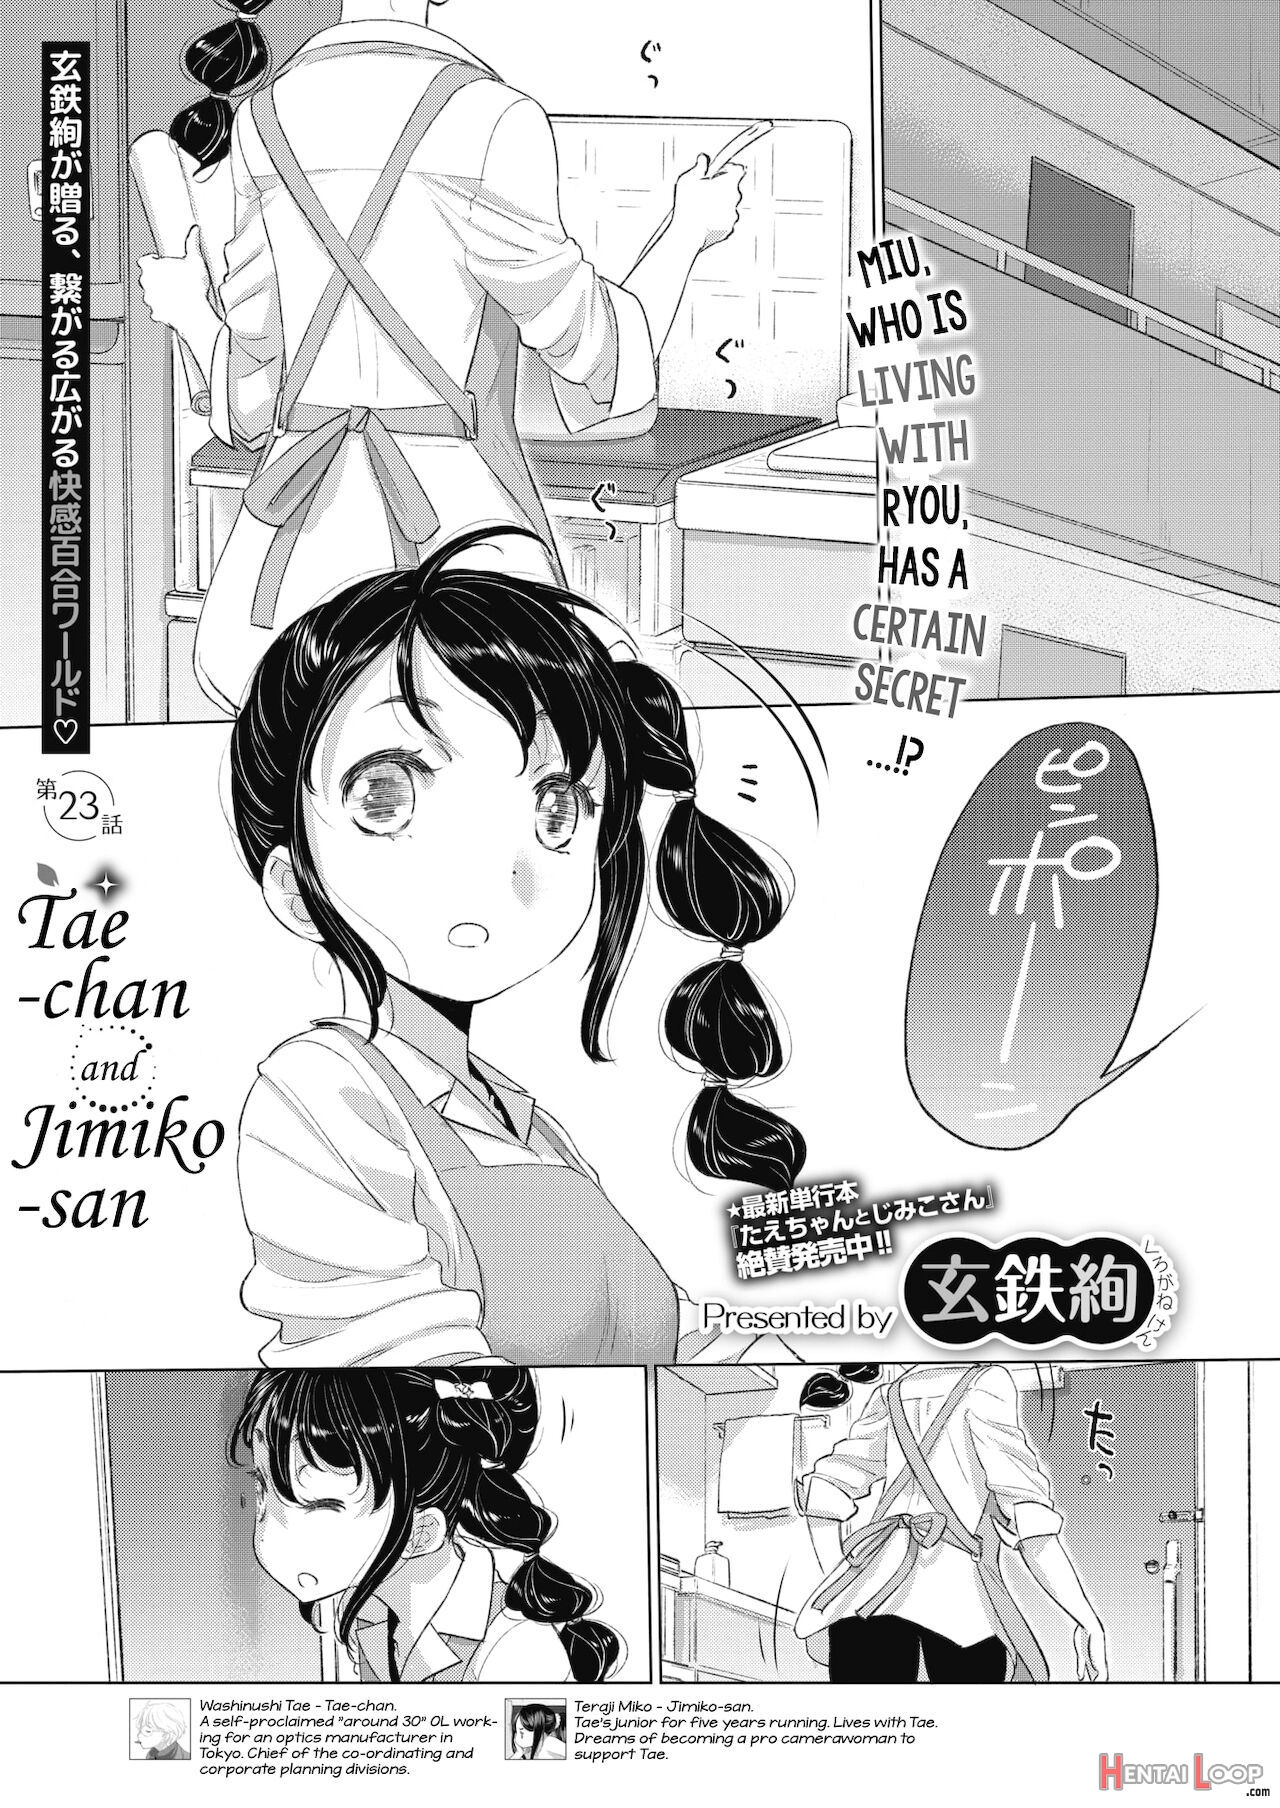 Tae-chan And Jimiko-san Ch. 1-27 page 306